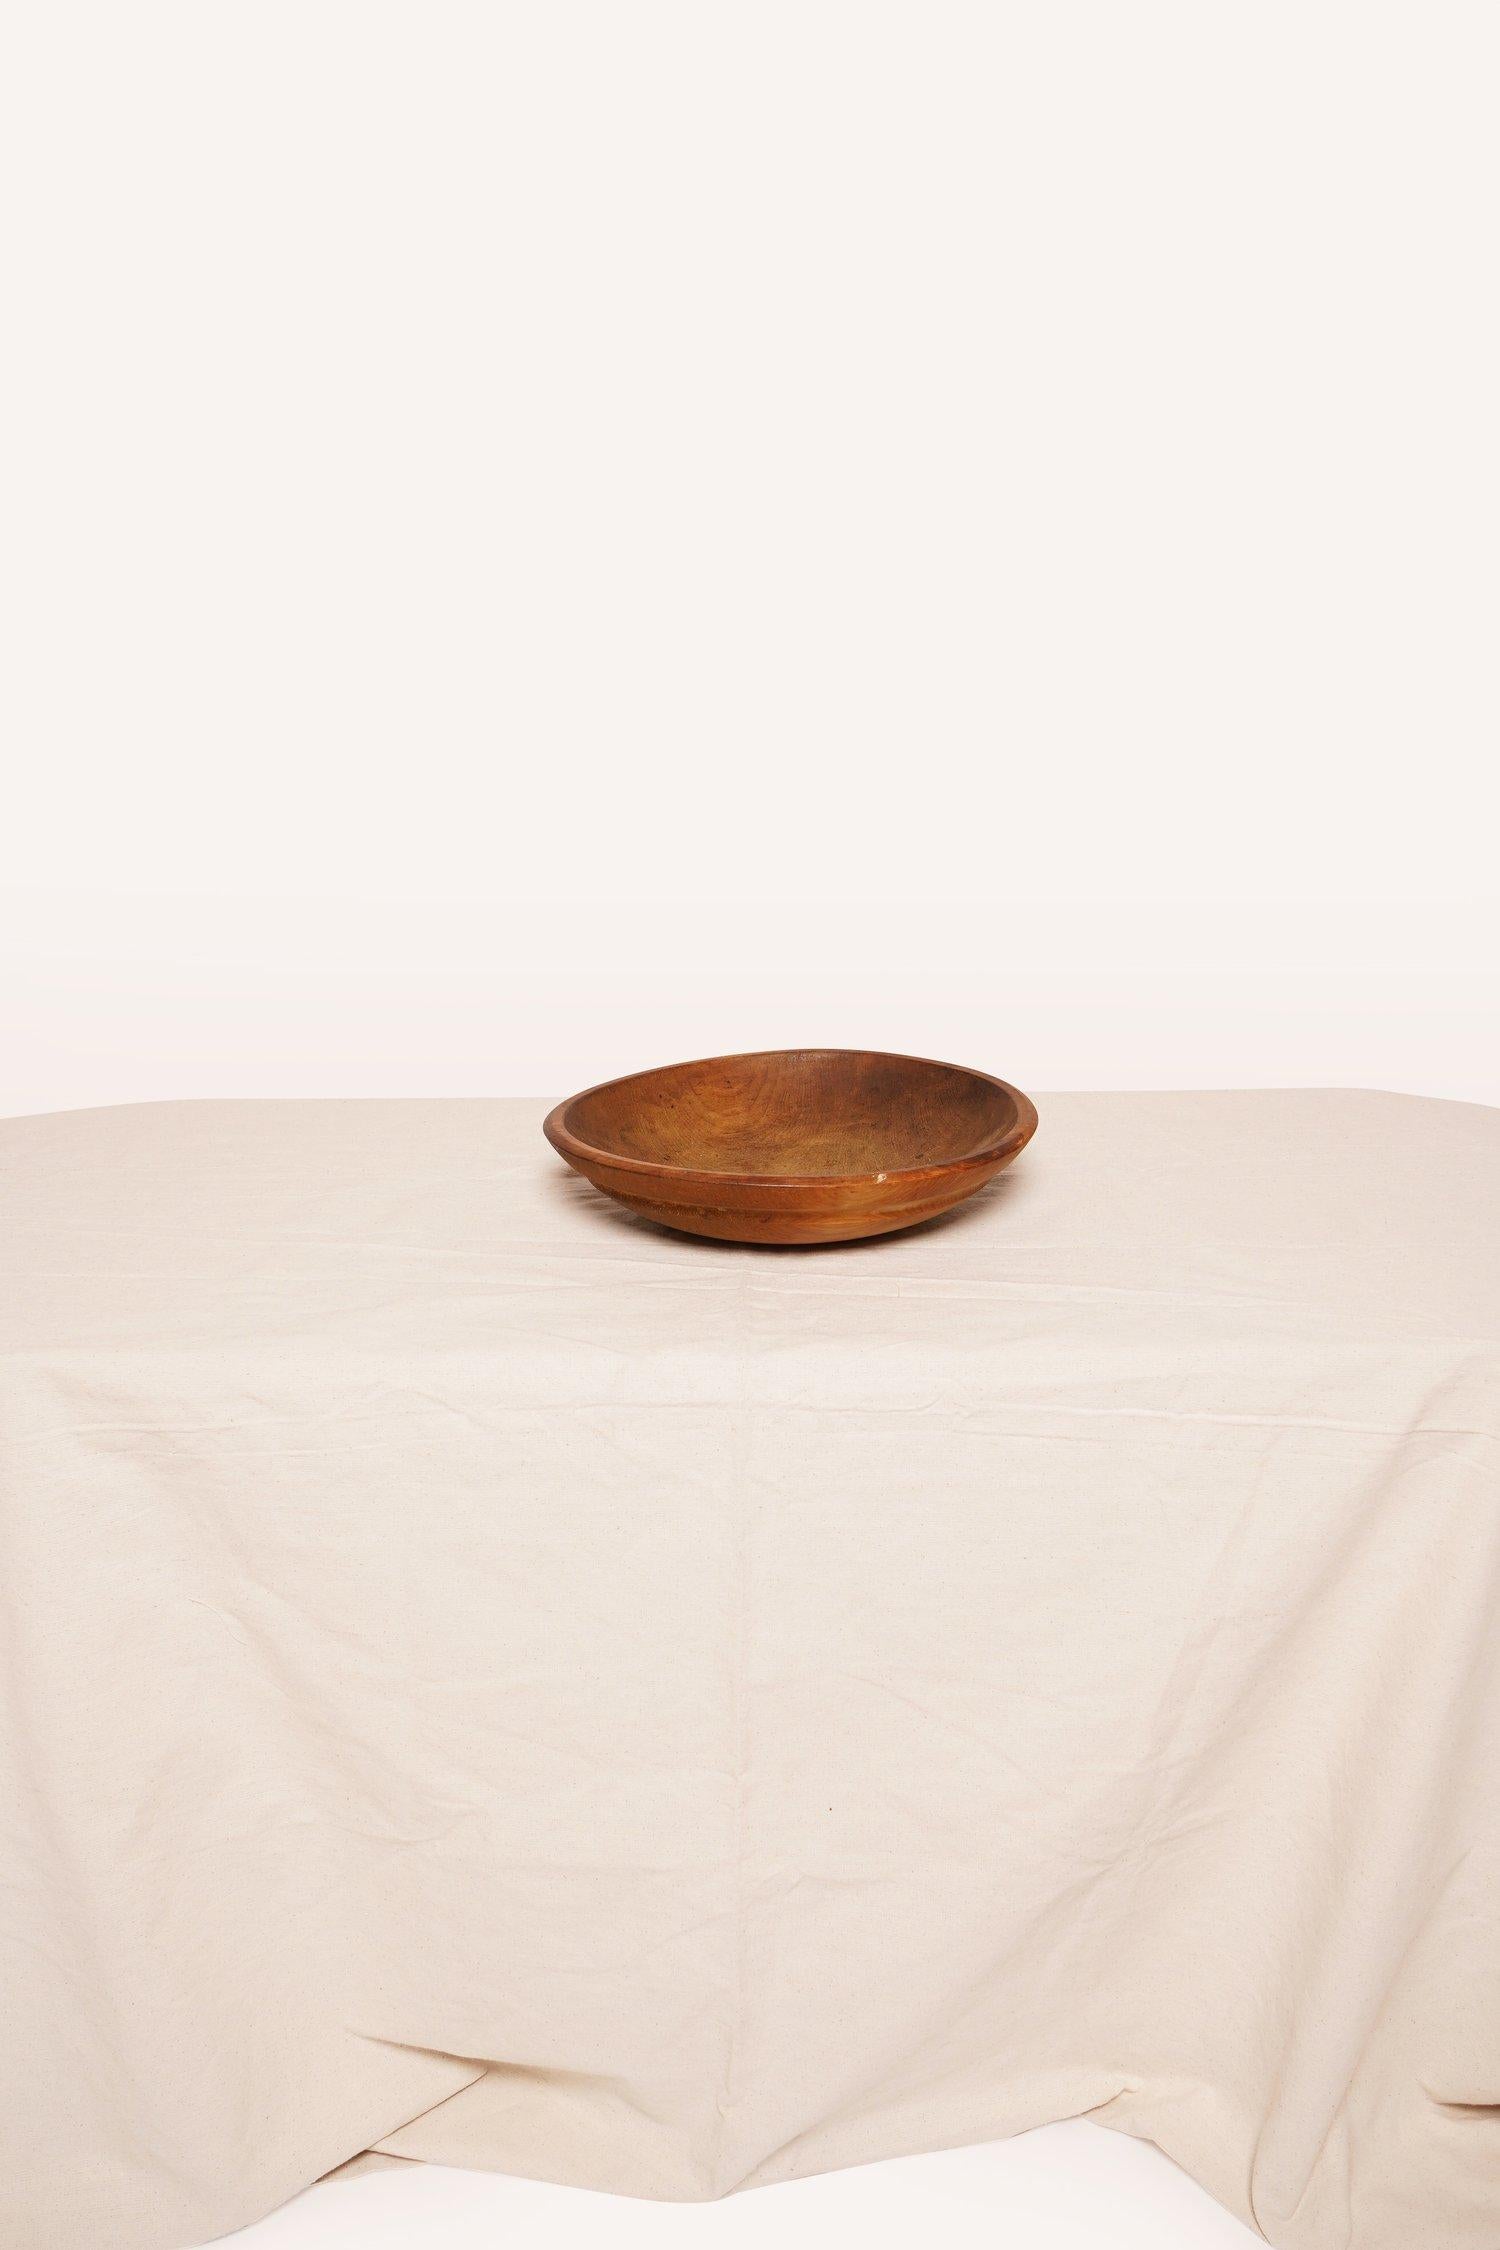 This trencher round wooden dough bowl was traditional used to prepare dough in the 19th century. This bowl can be used for storage or displaying as is.